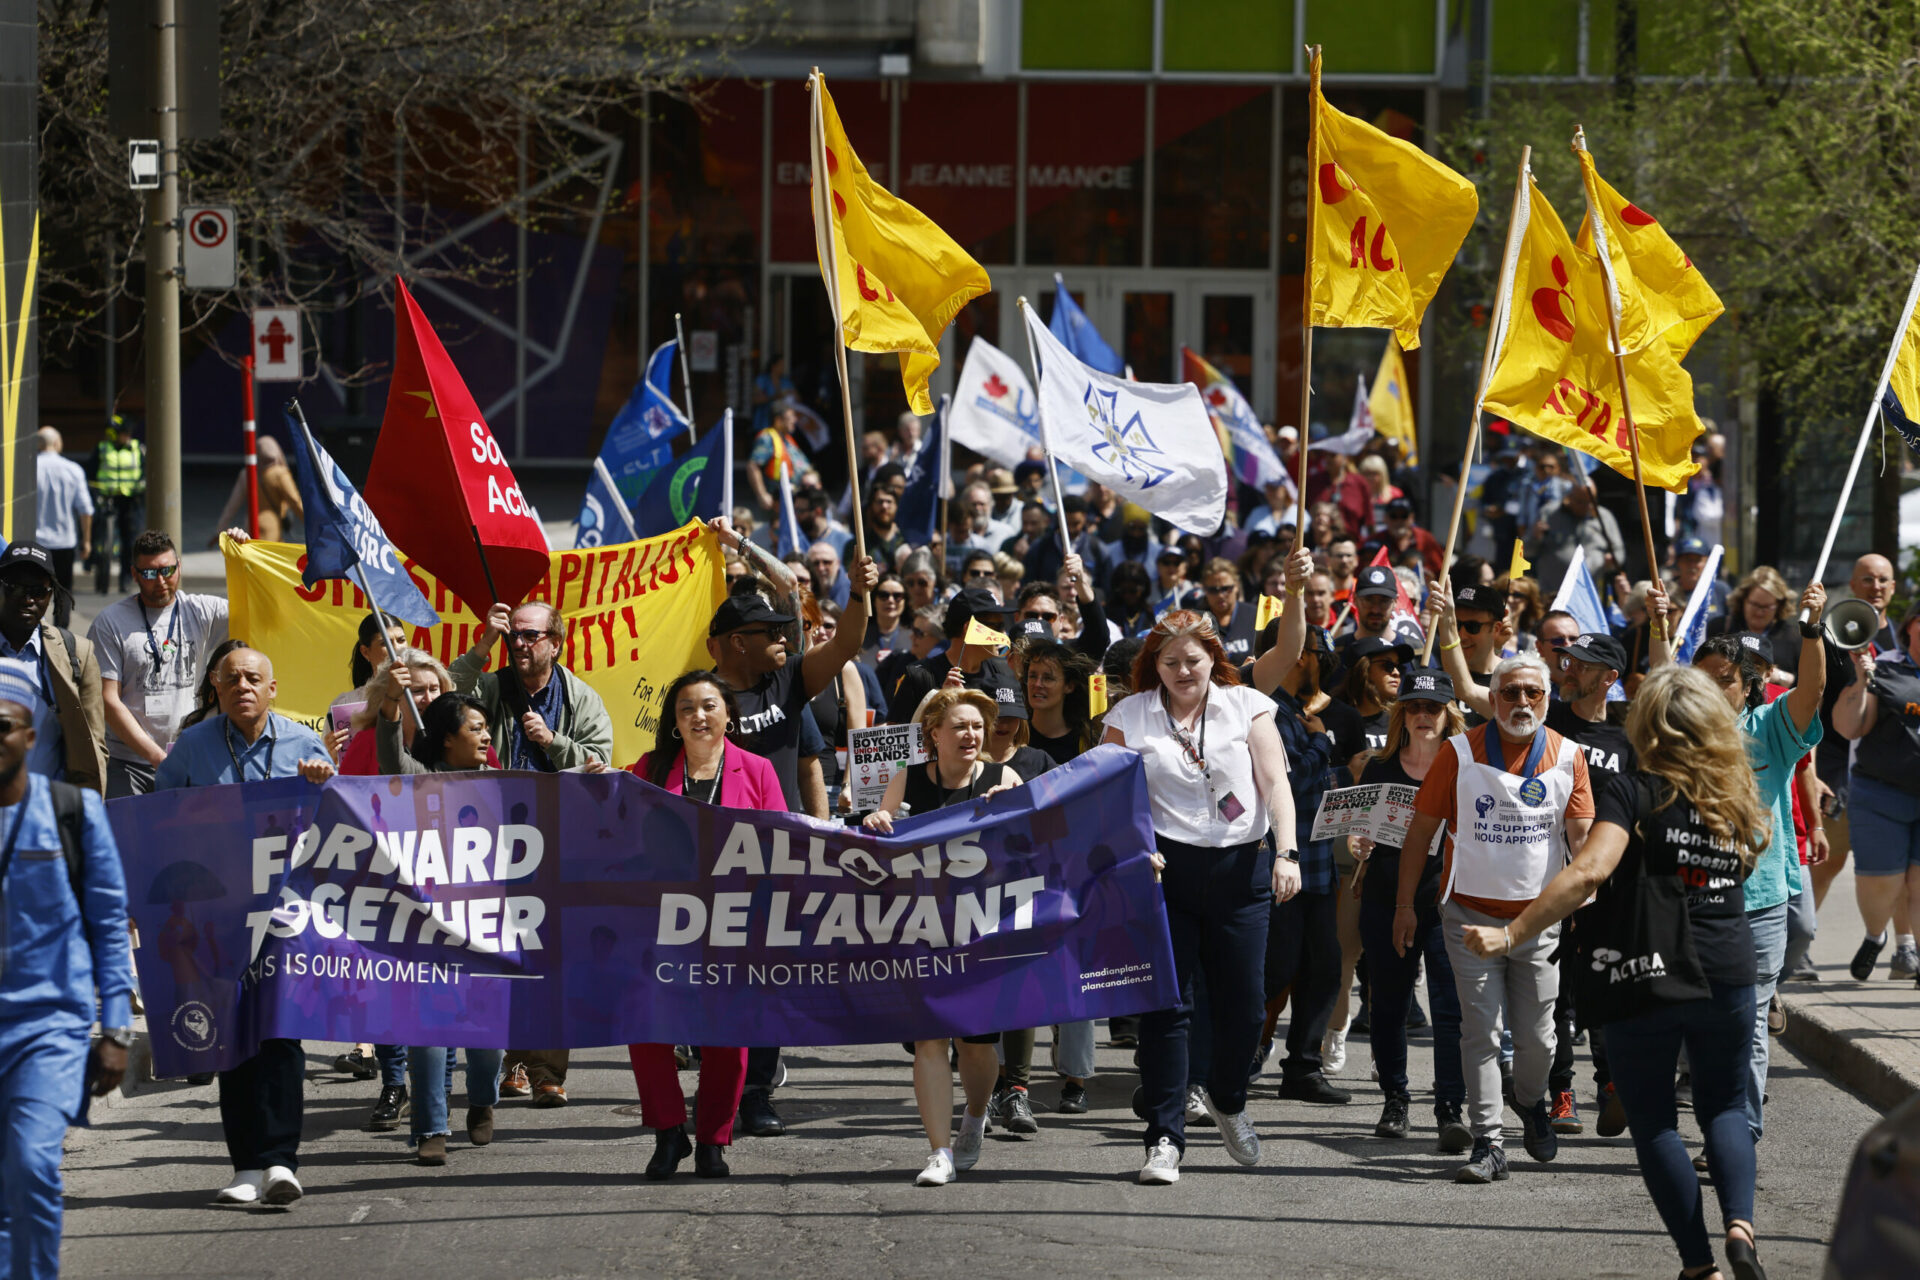 NEW POLL: CANADIANS BACK UNIONS TO DELIVER WORKER PROTECTIONS, FAIRER WAGES